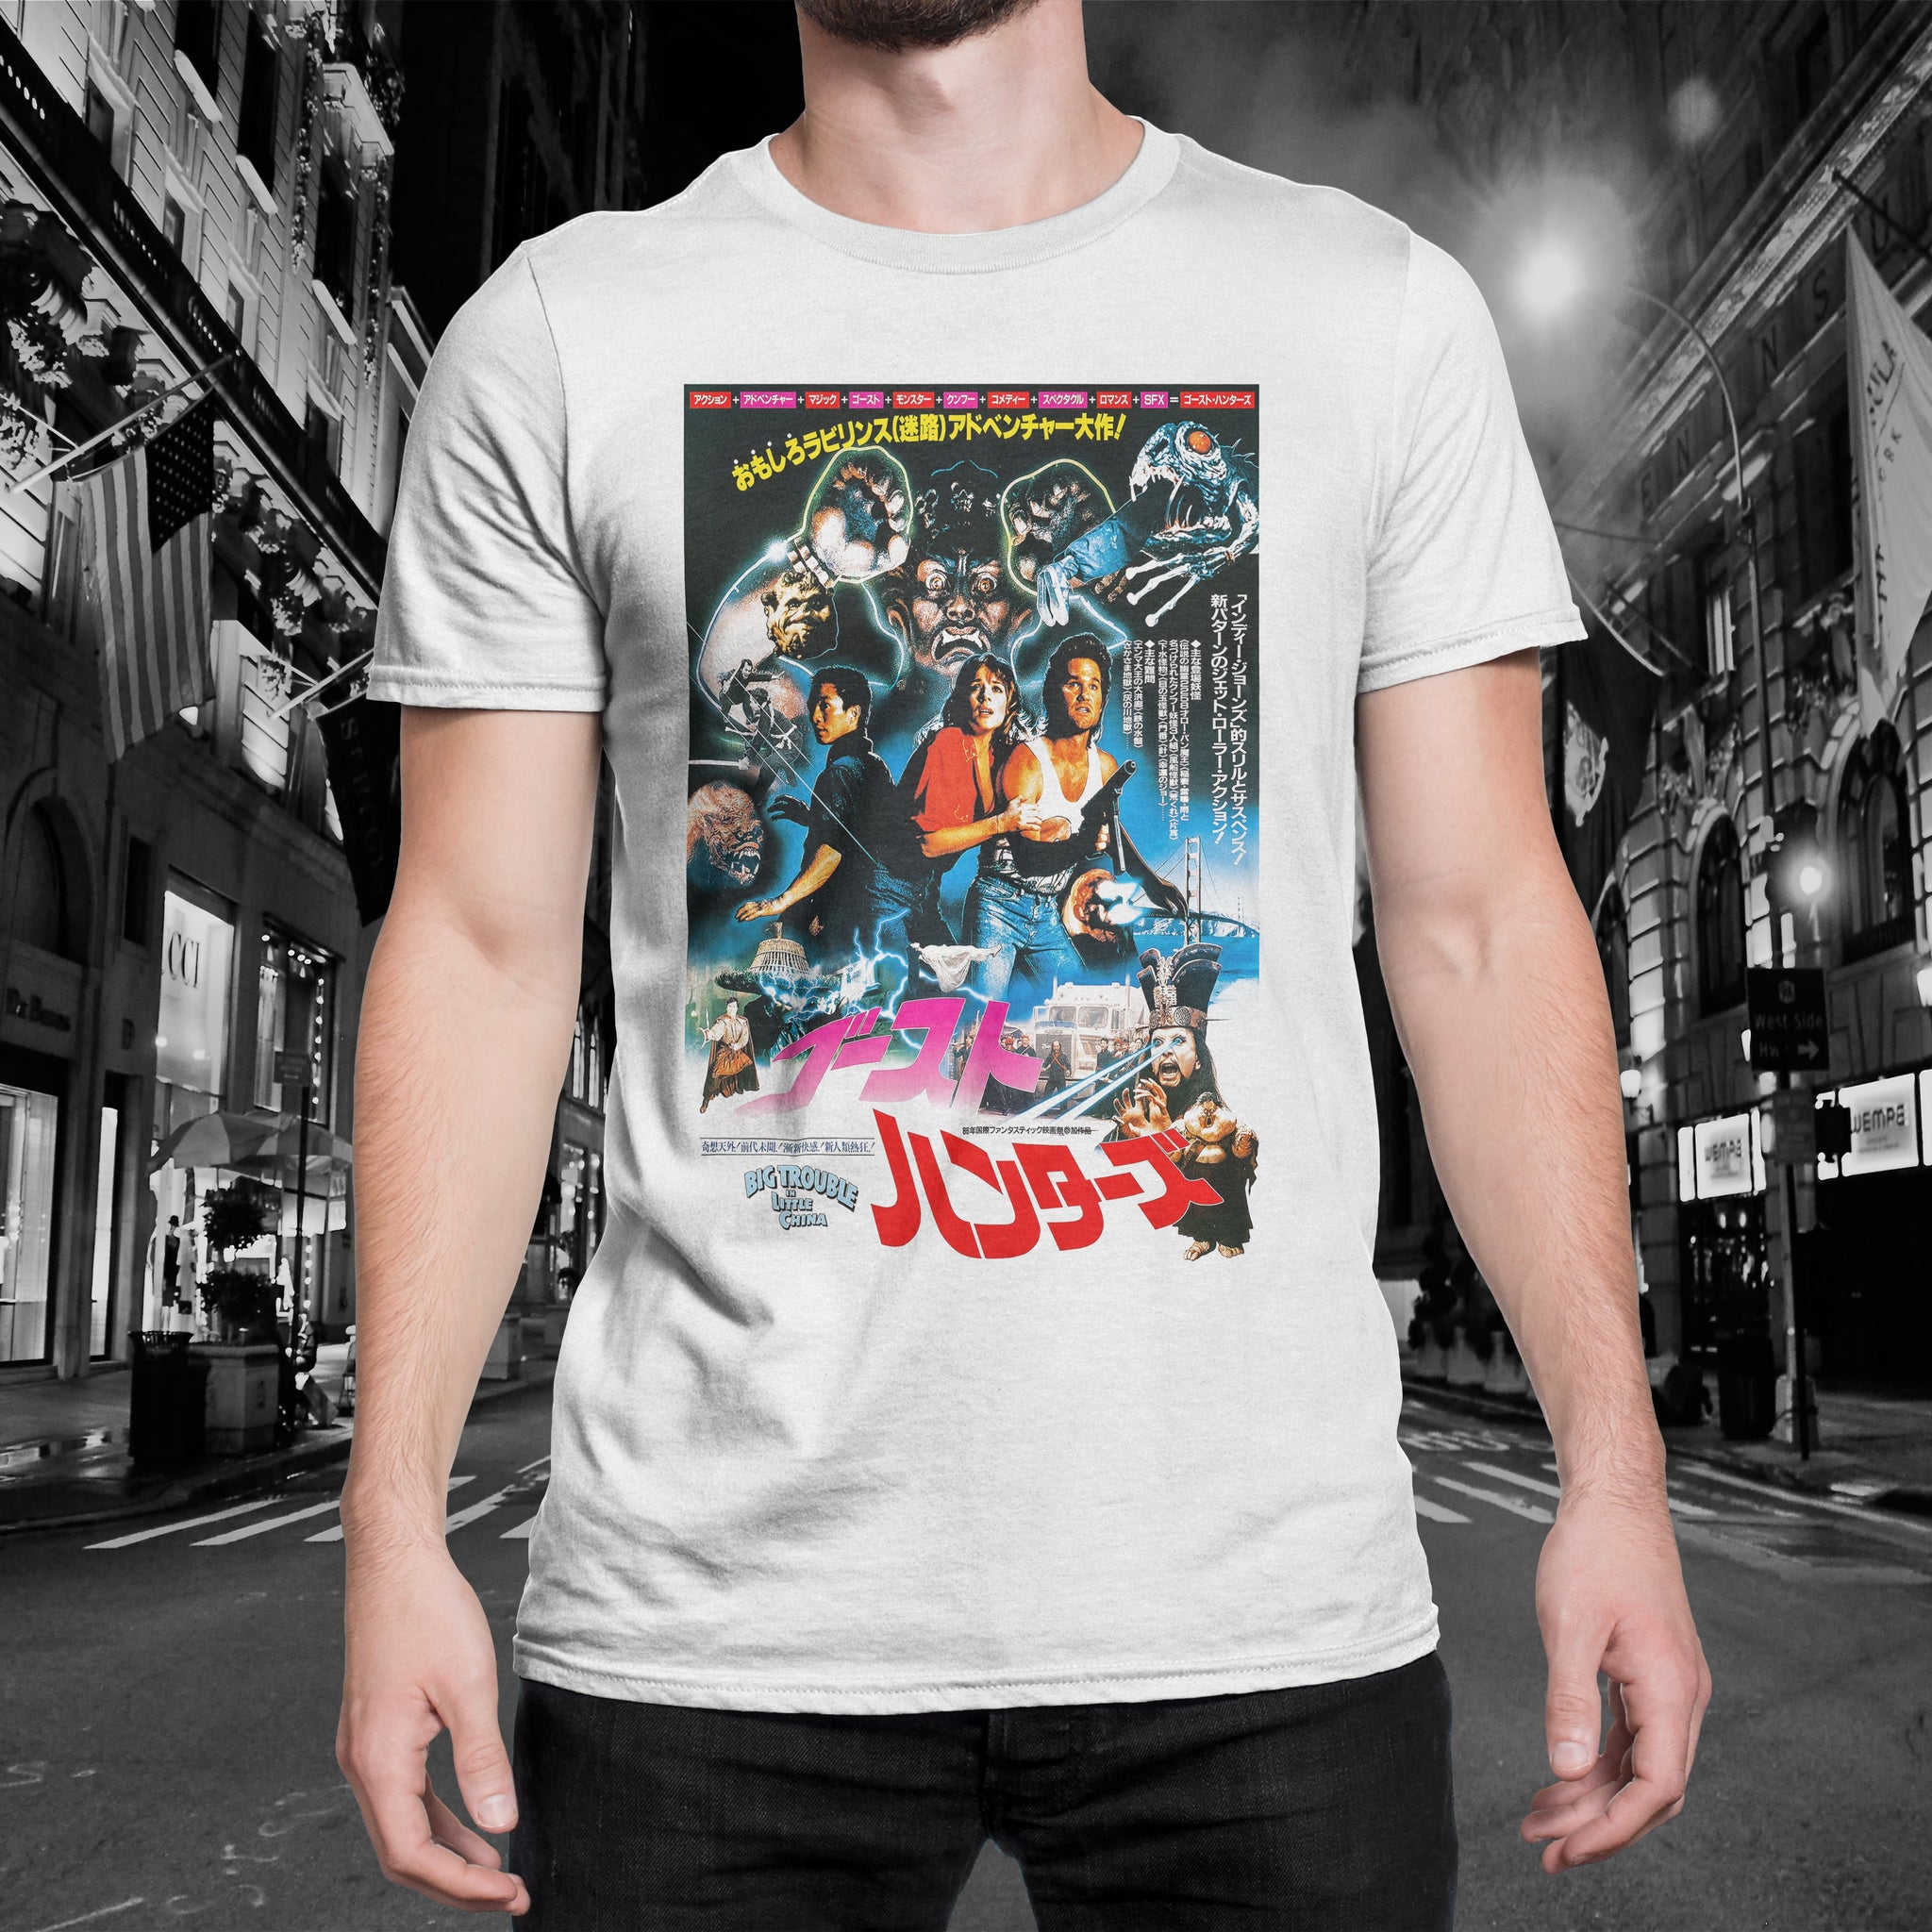 Big Trouble in Little China "Japan" Tee